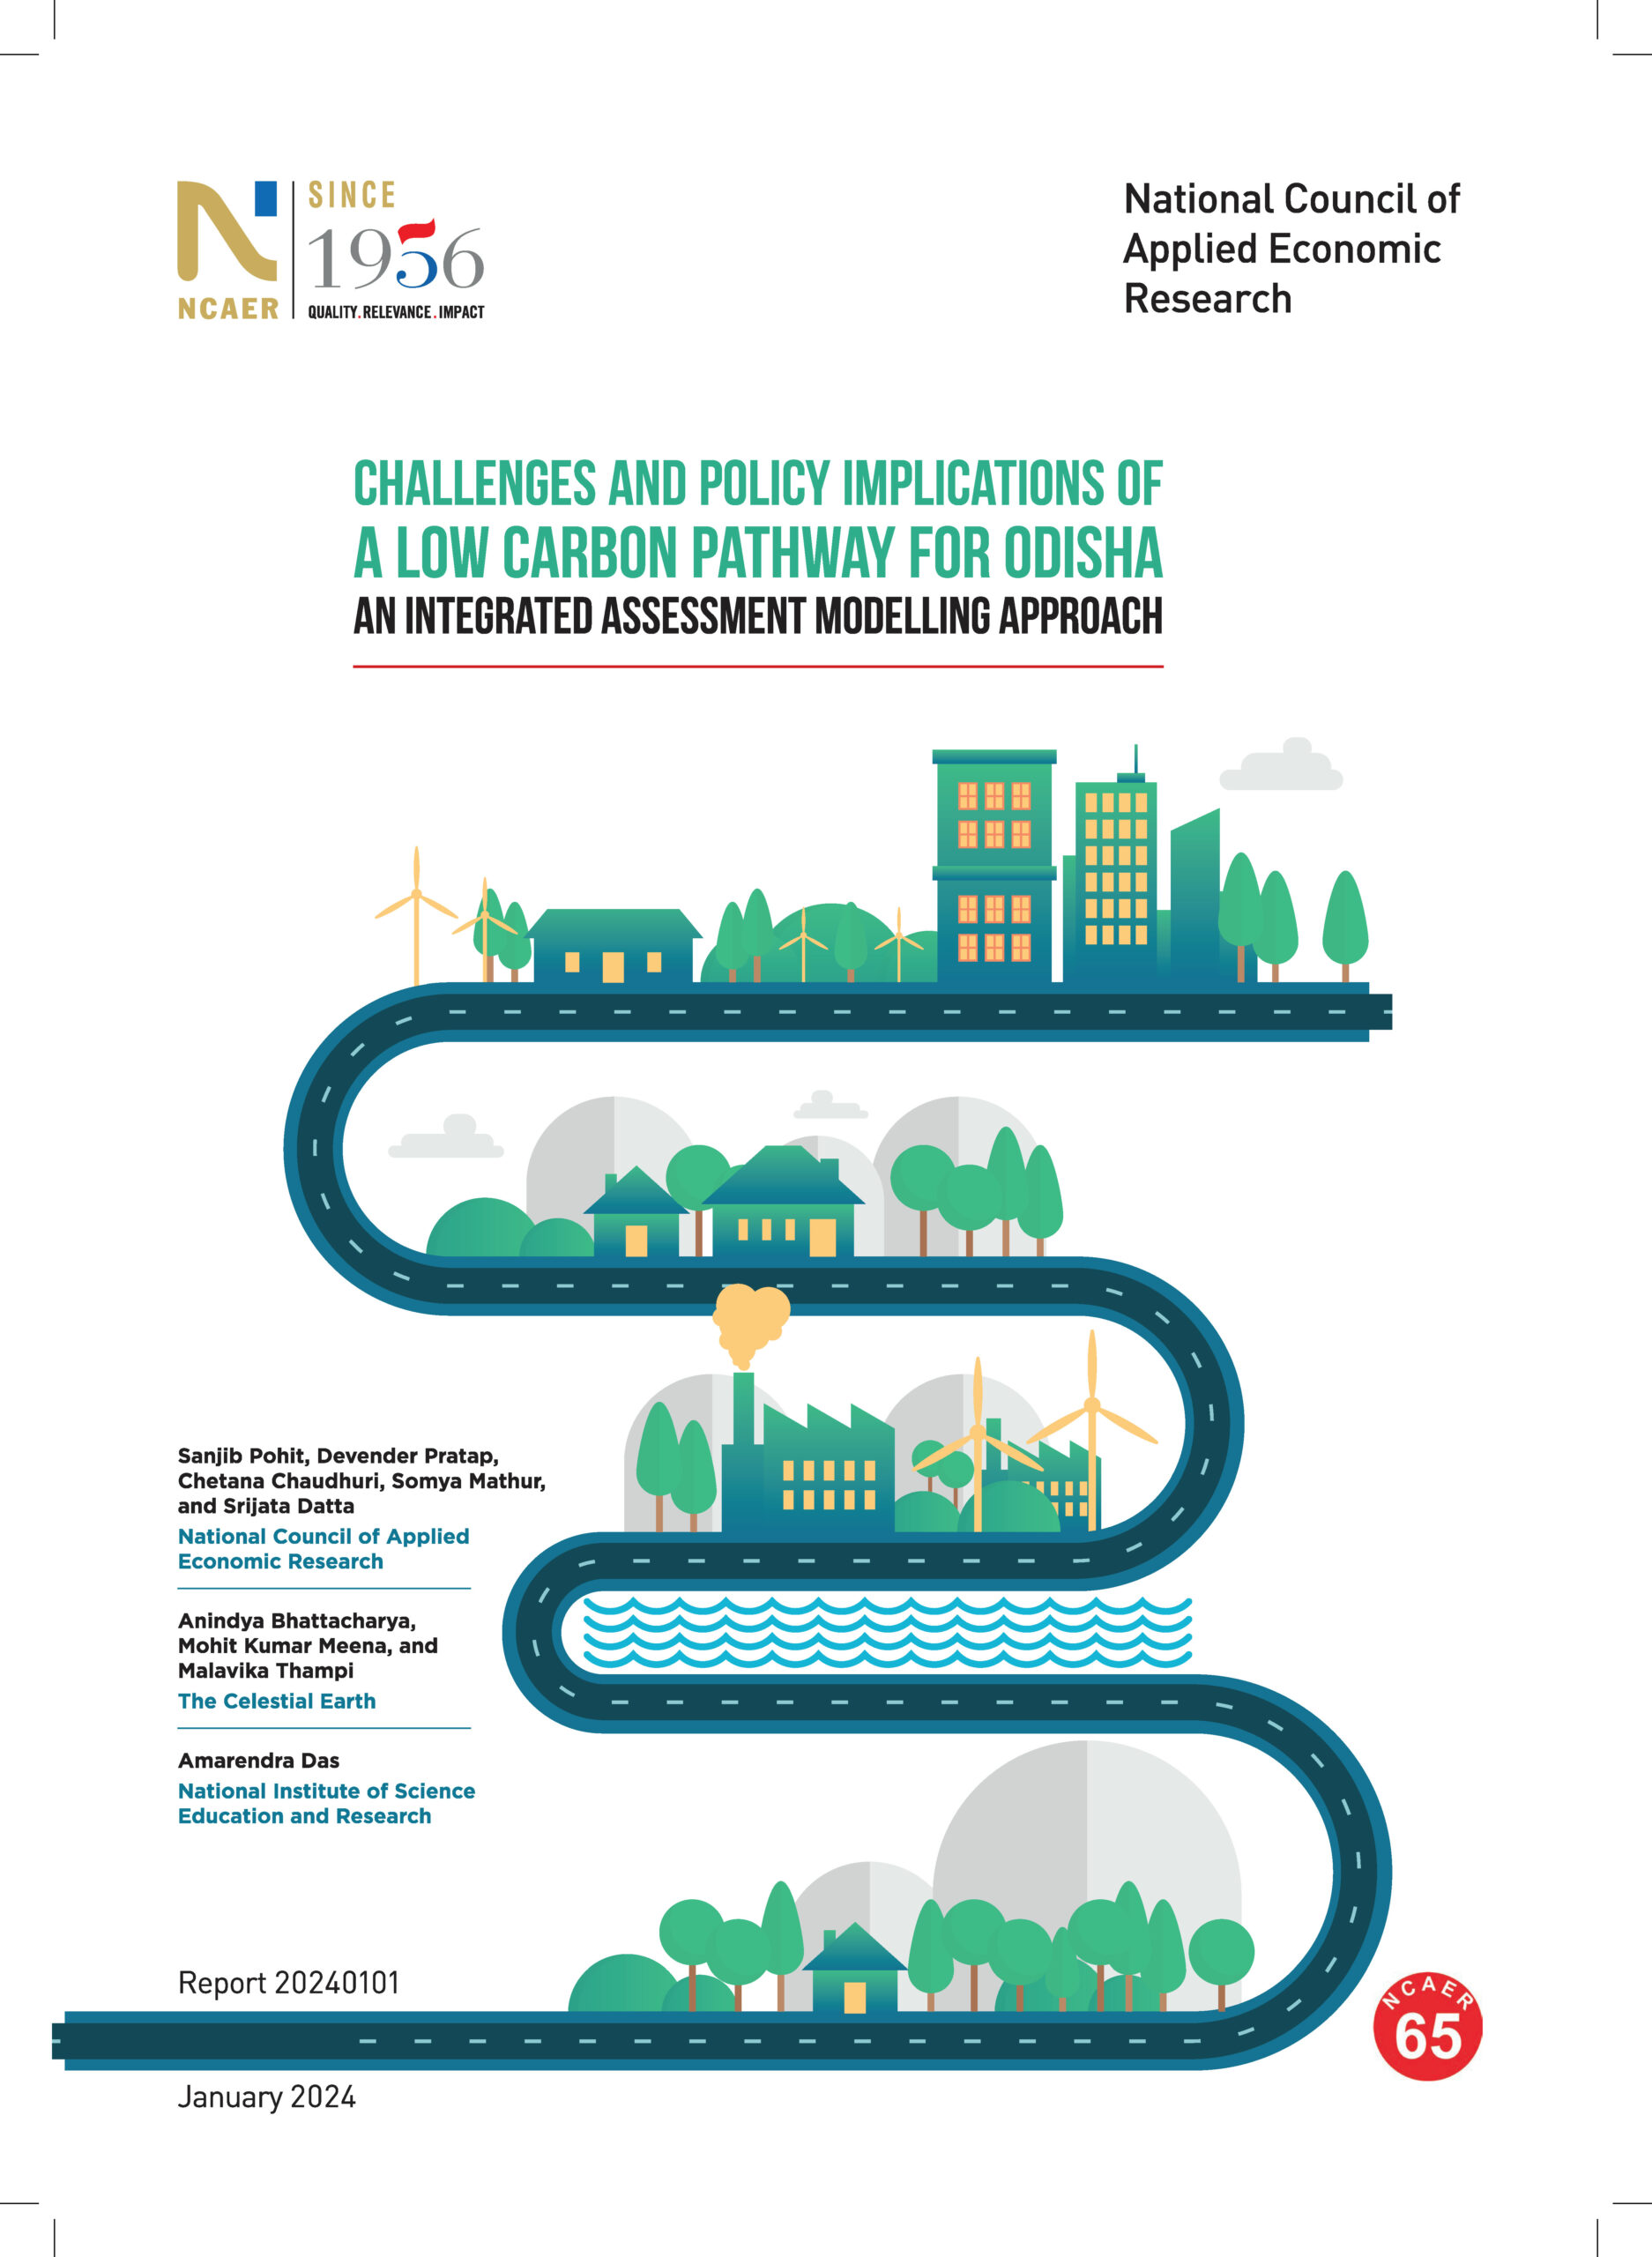 Challenges and Policy Implications of a Low Carbon Pathway for Odisha